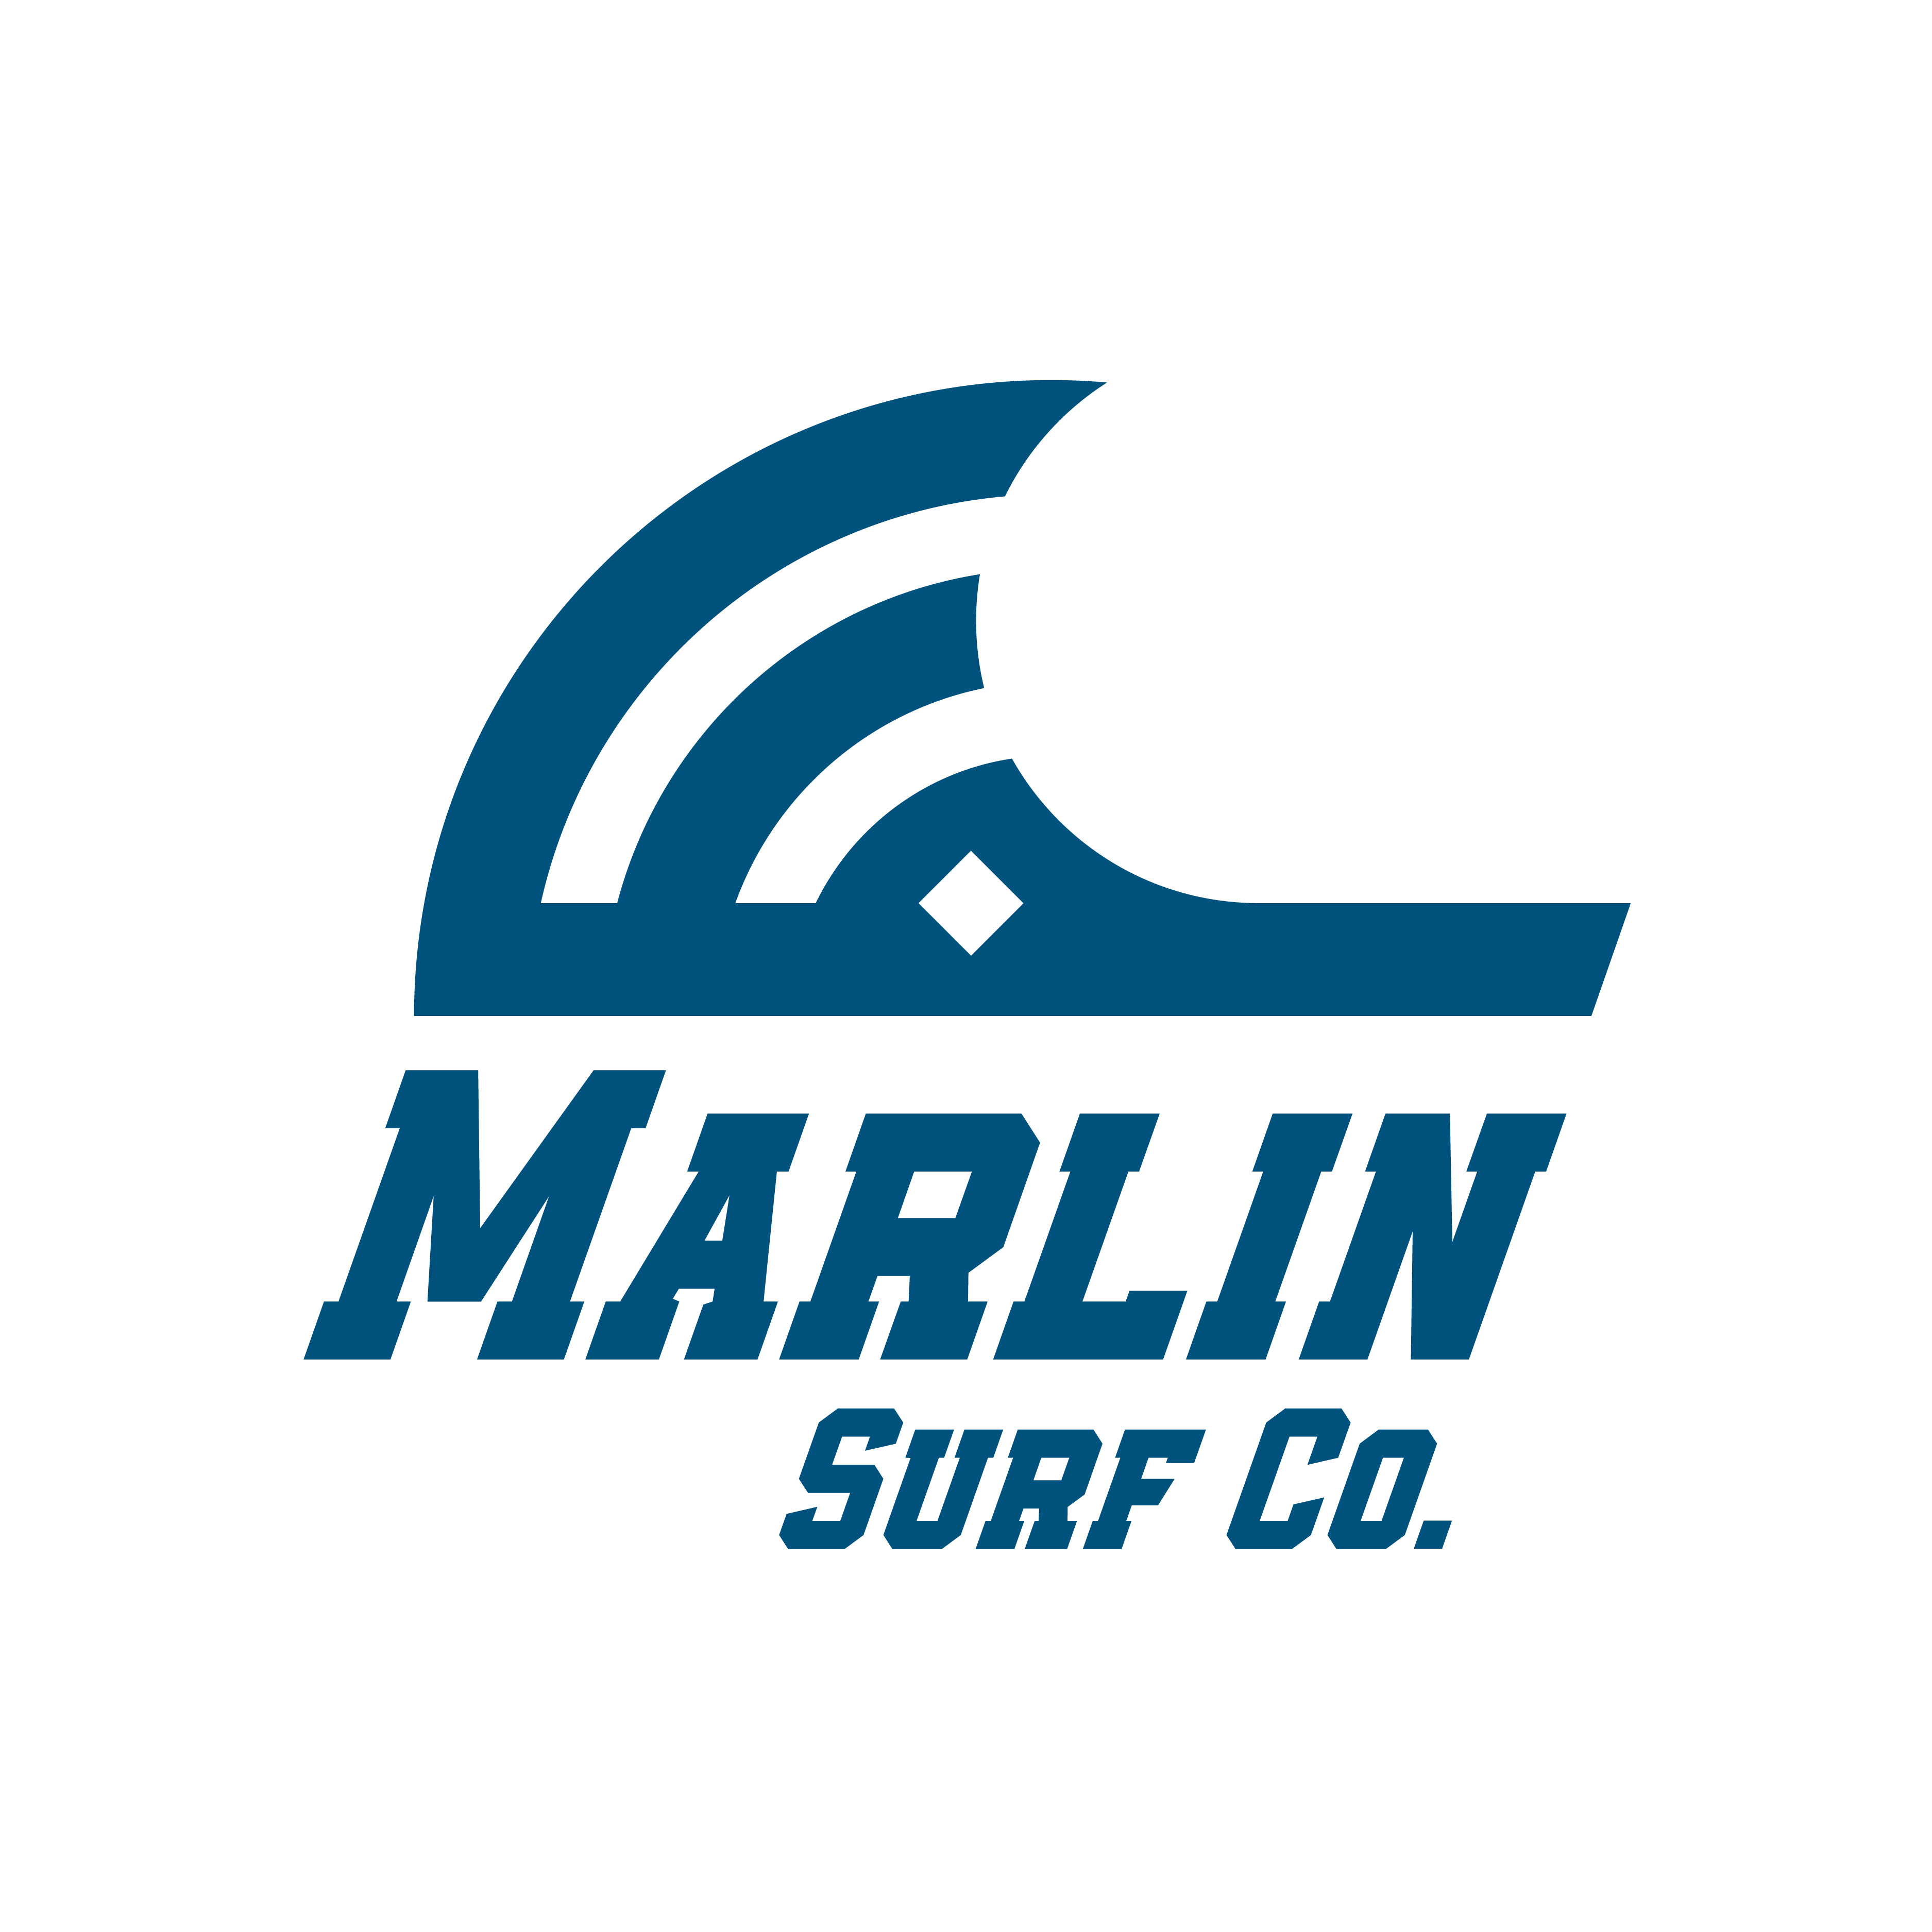 Marlin Surf Co. logo design by logo designer L.L. Peach for your inspiration and for the worlds largest logo competition